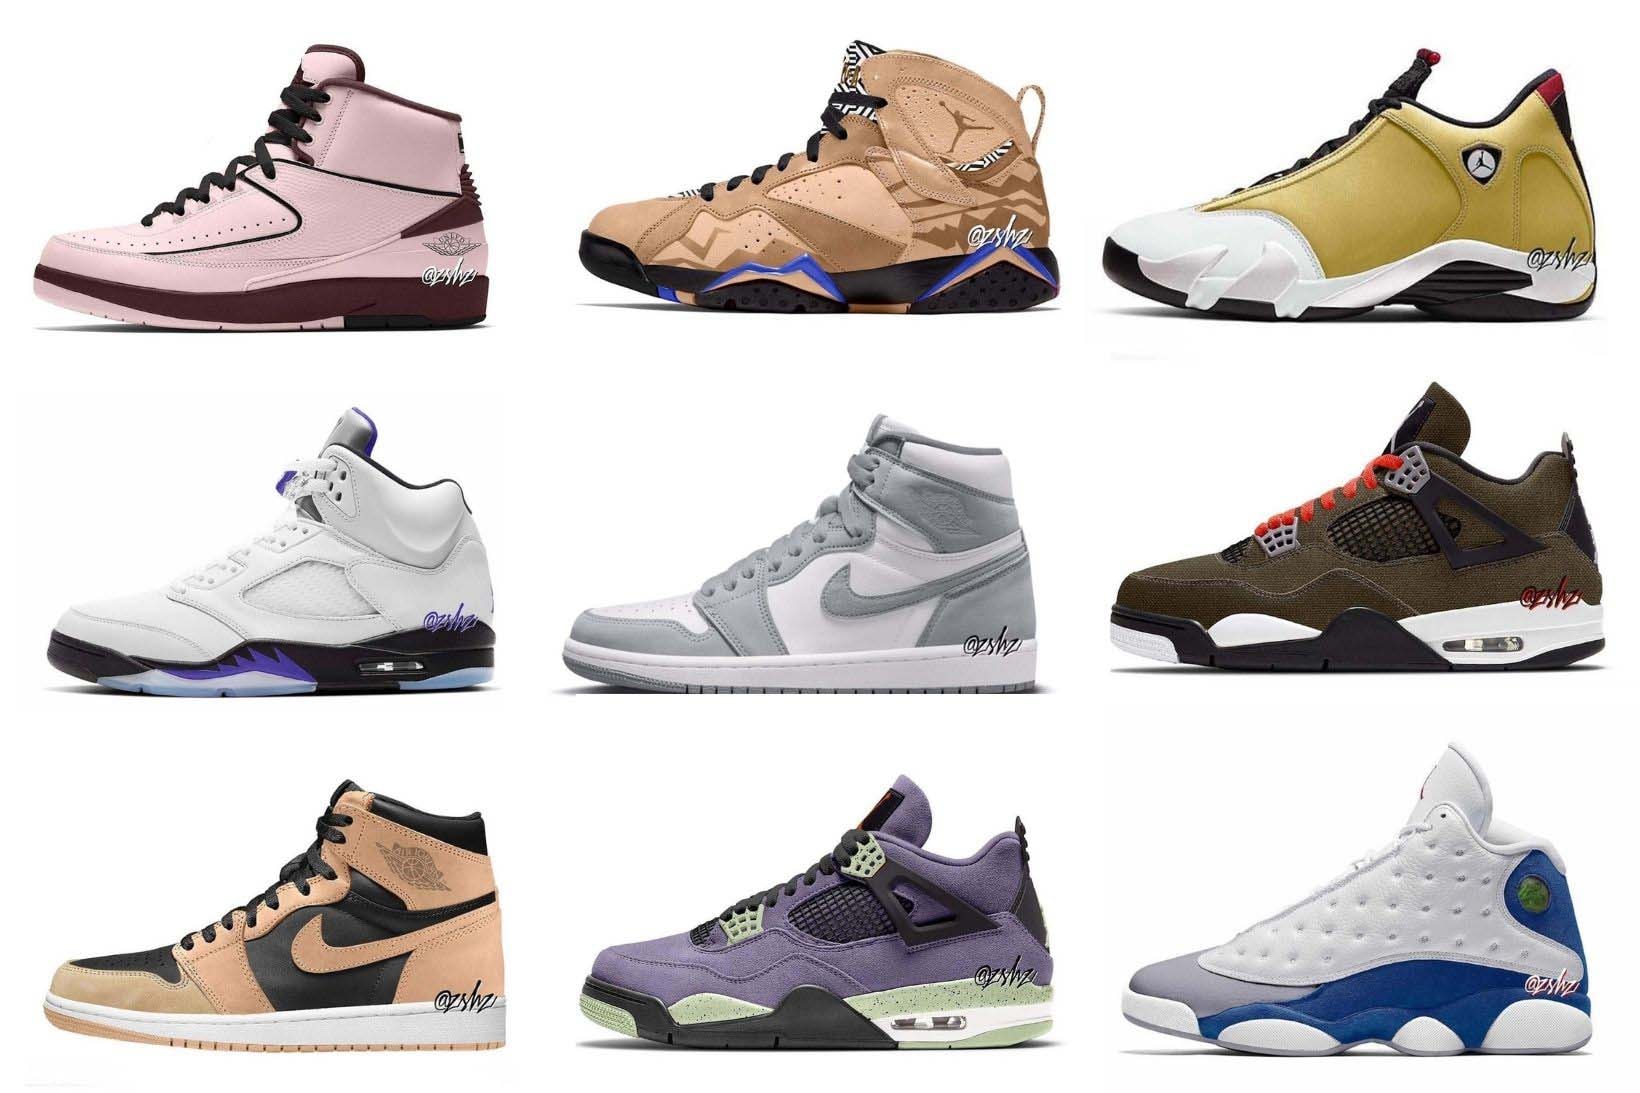 Air Jordan Fall 2022 Collection A Ma Maniere Starfish Canyon Purple Ginger Hyper Royal Georgetown Concord Yellow Toe Citrus Olive IE French Blue UNC Afrobeats Grey Stealth Price Release Date Collaboration